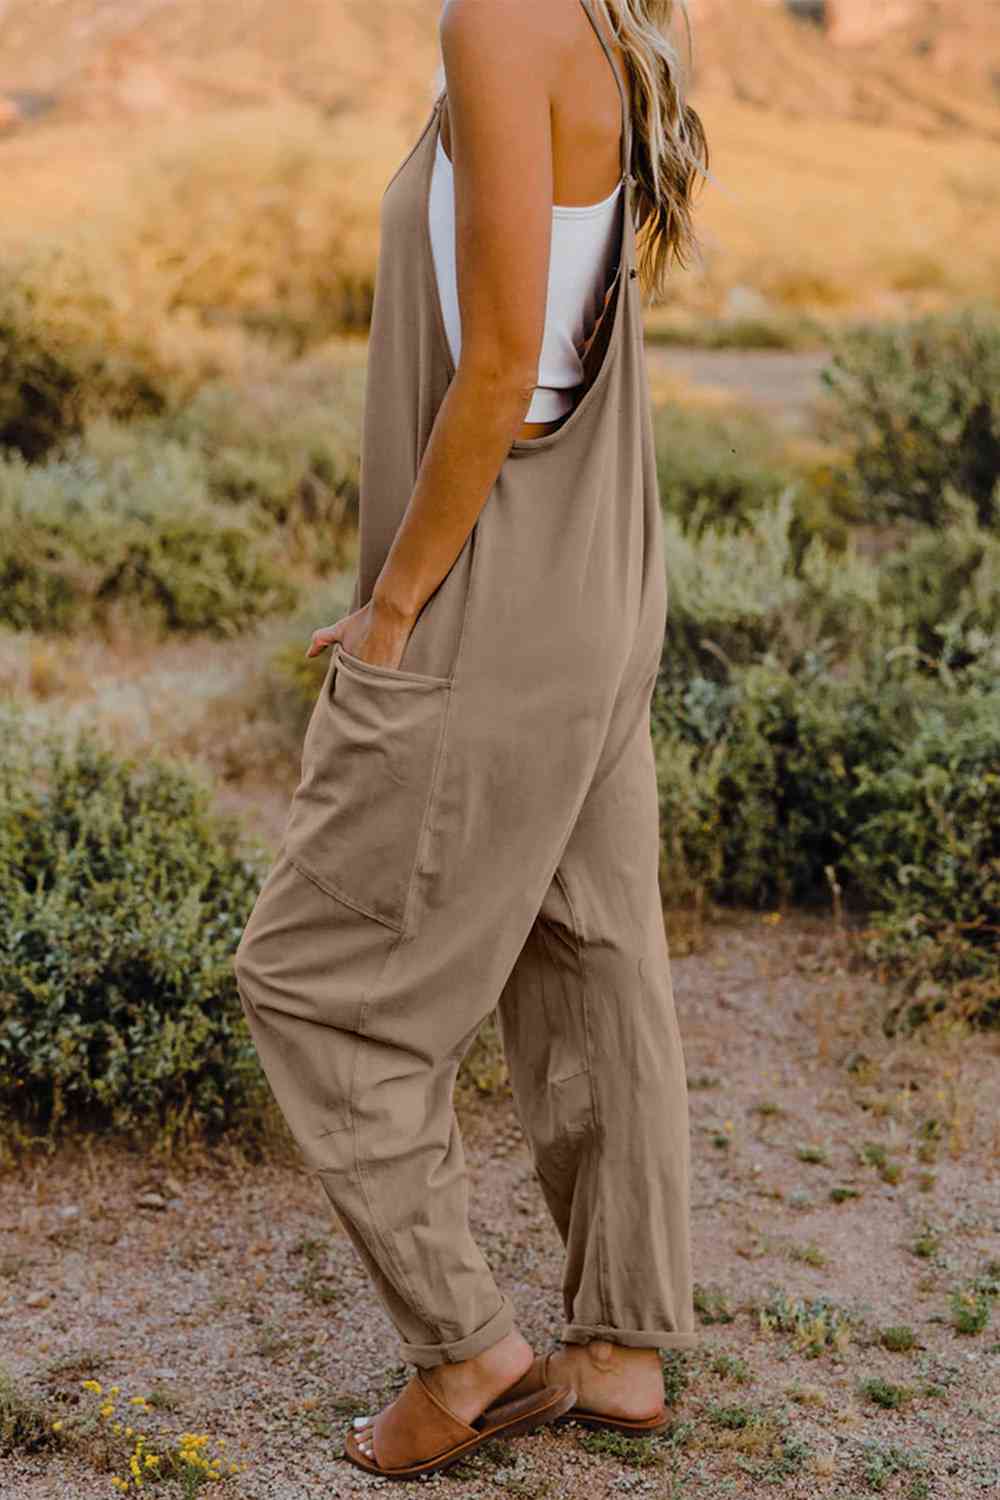 Double Take  V-Neck Sleeveless Jumpsuit with Pocket - Multiple Colors!